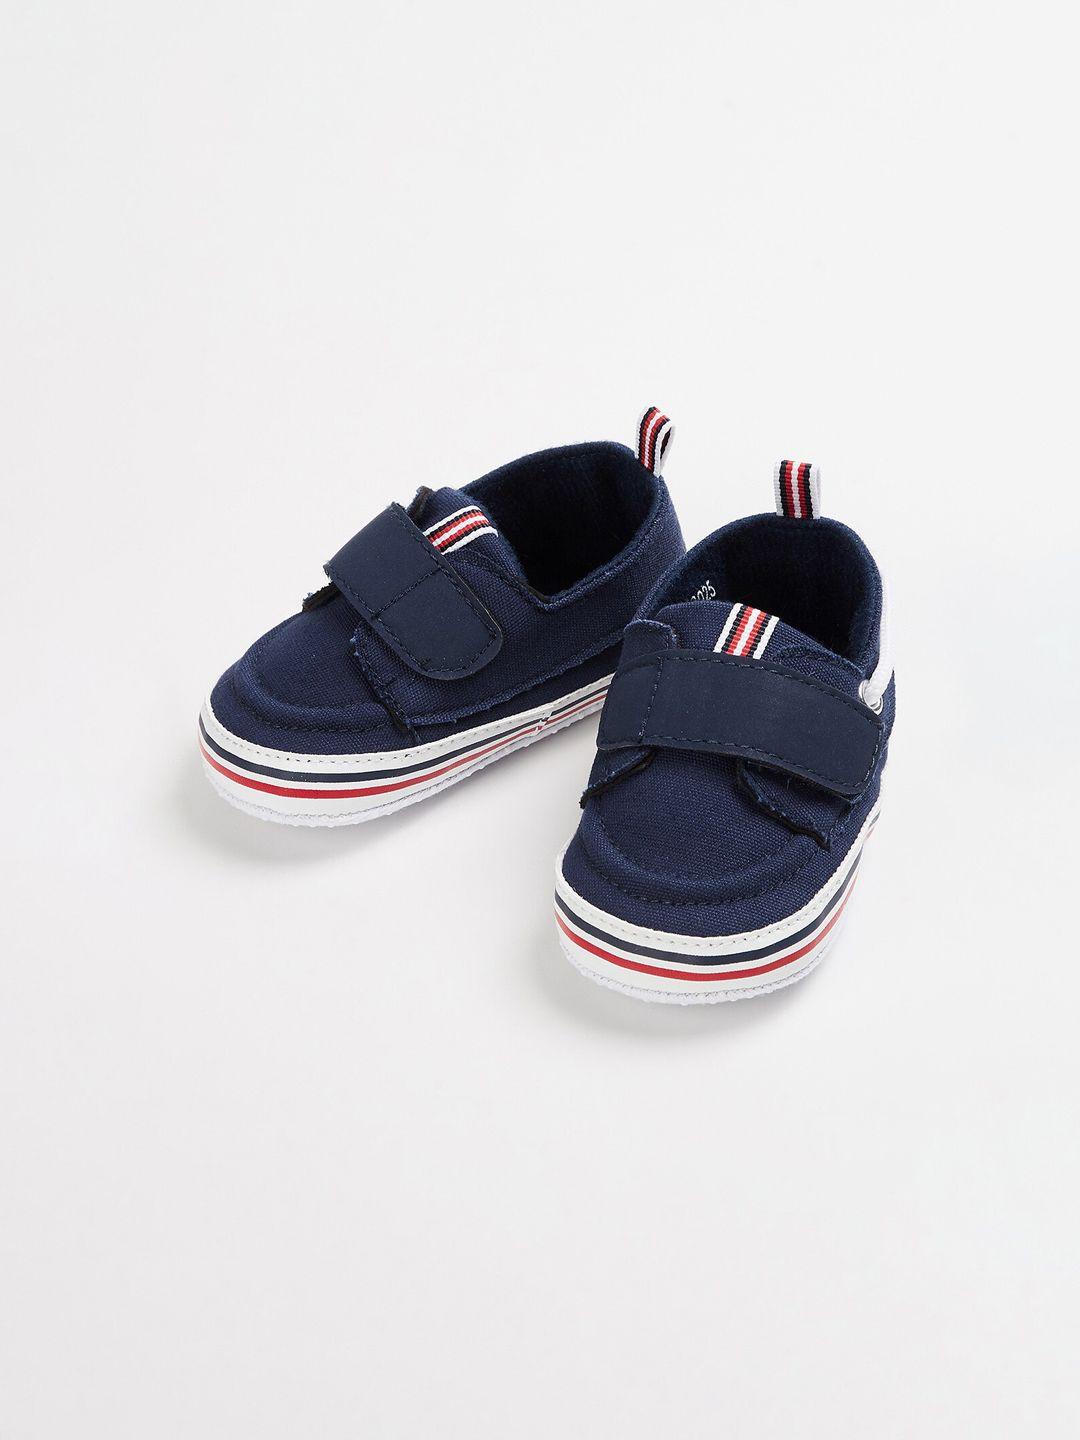 fame forever by lifestyle boys navy blue boat shoes